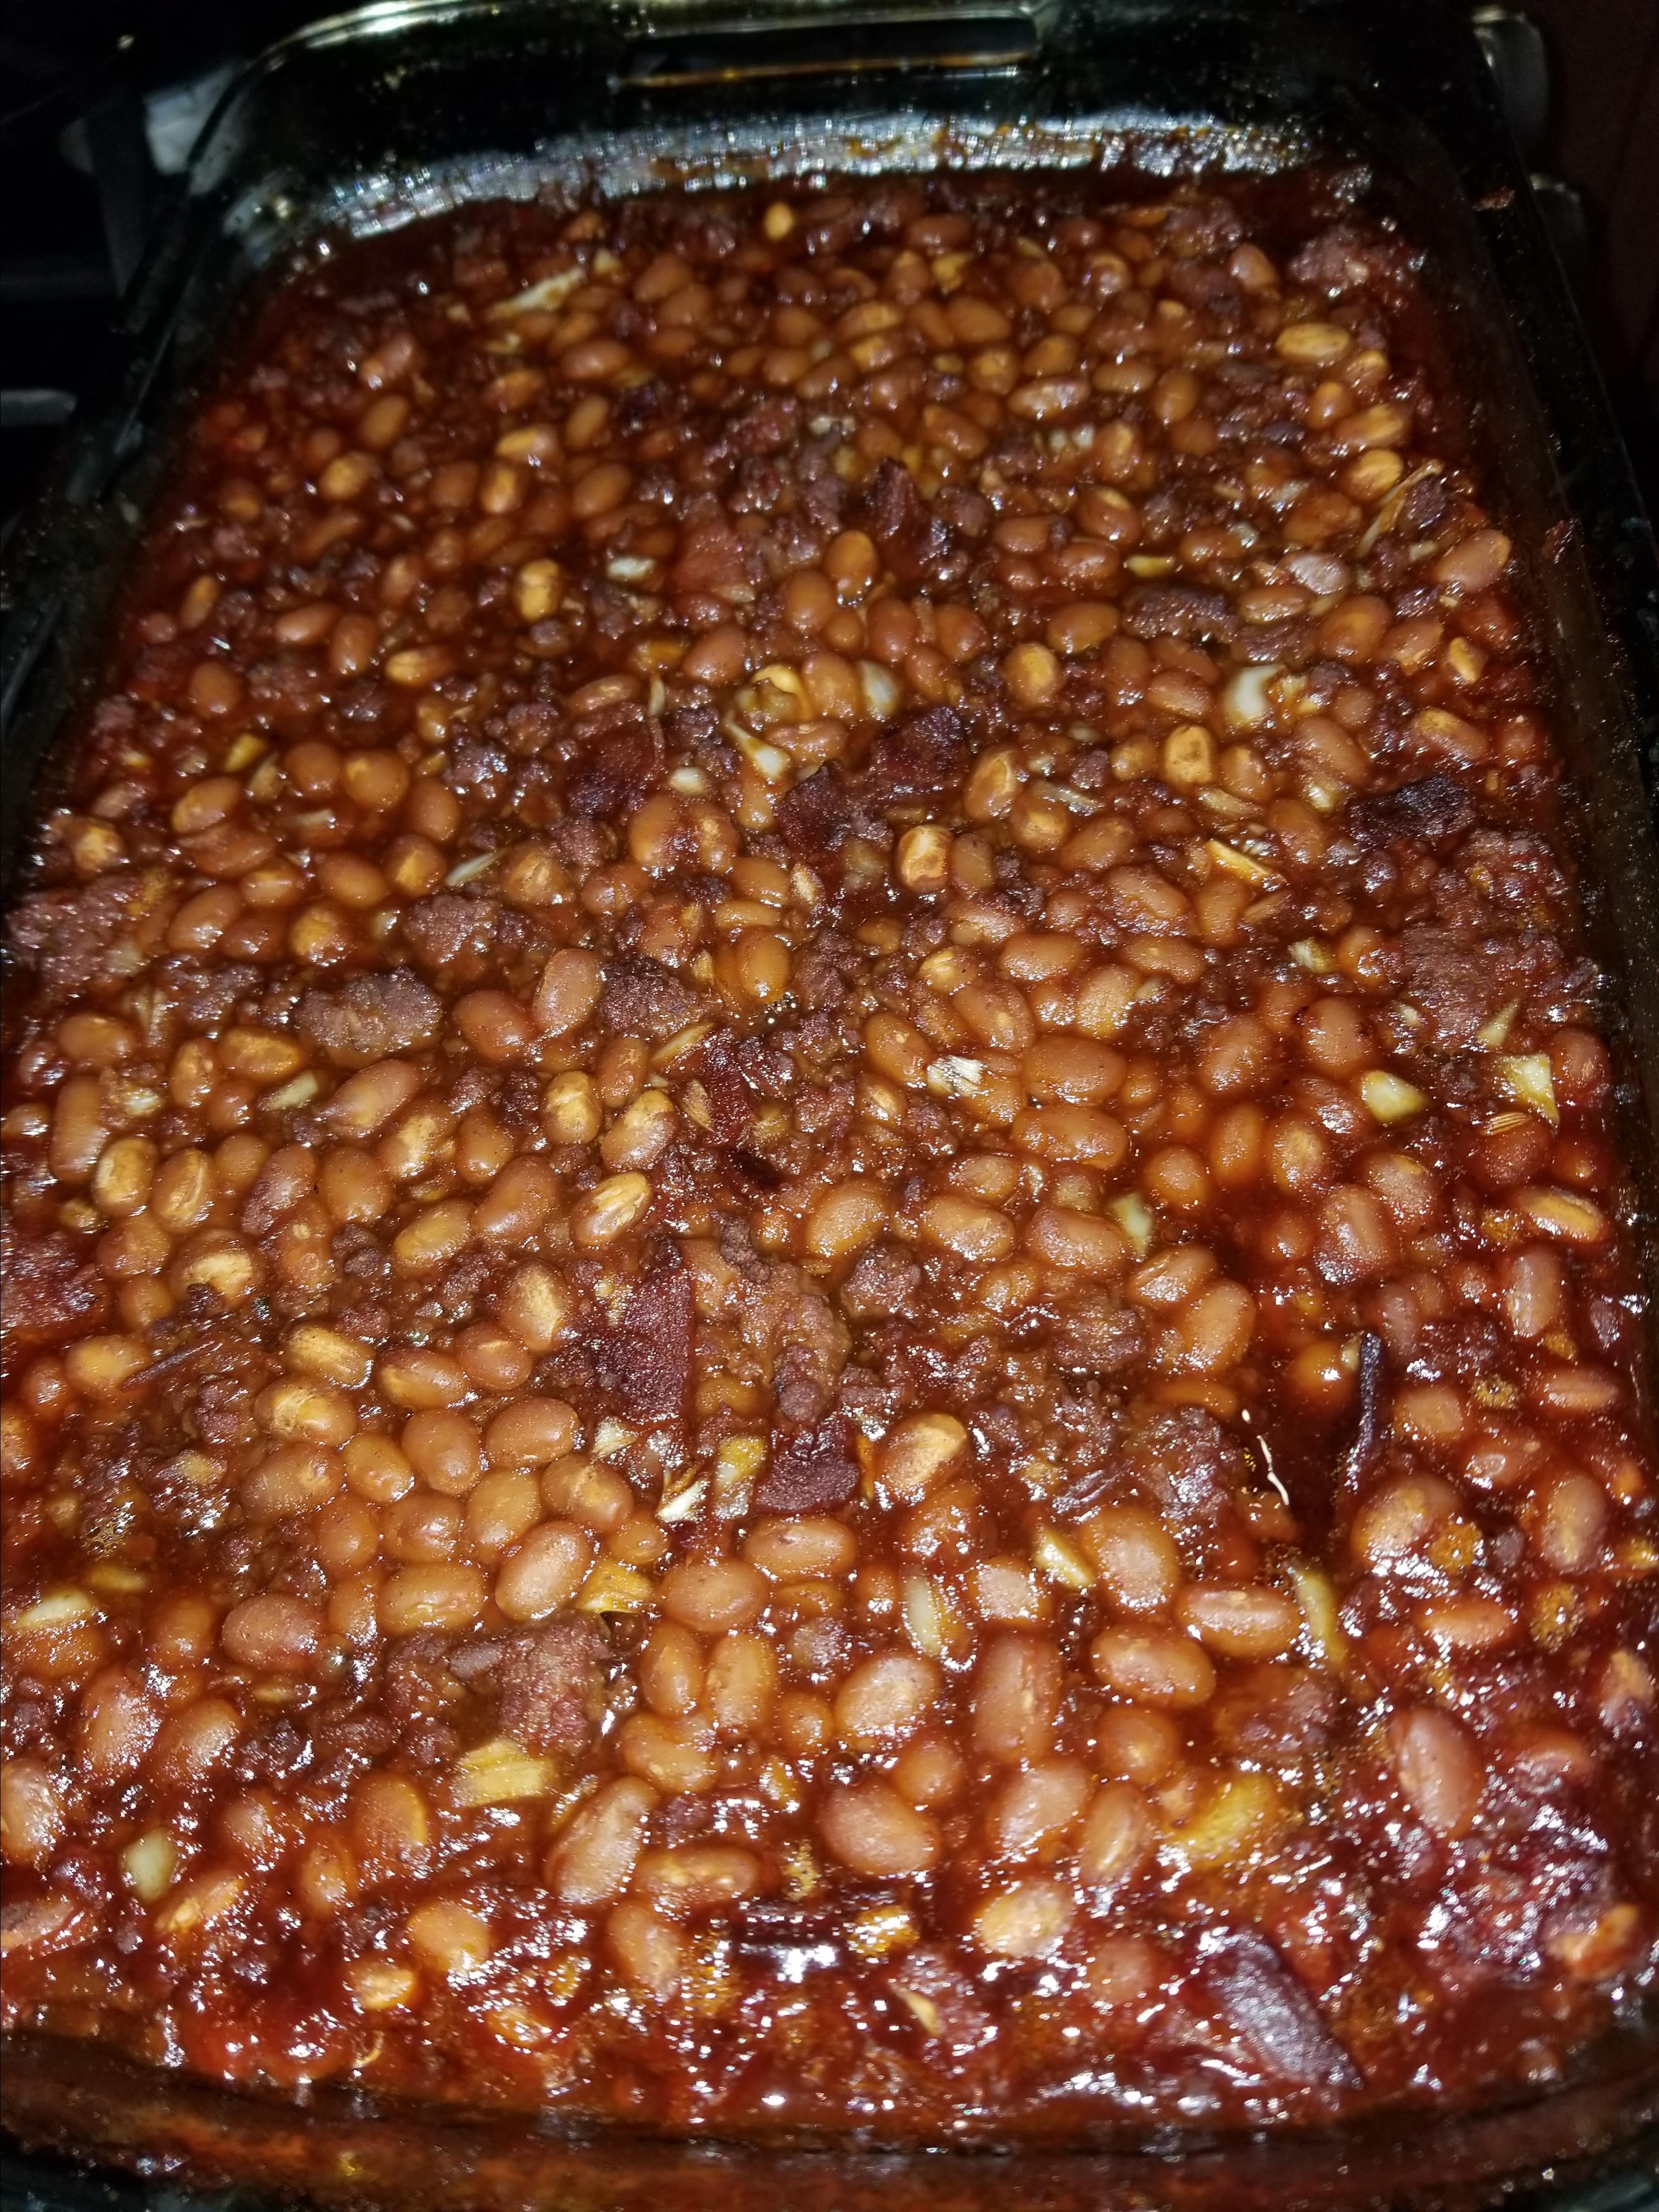 Spicy Barbecue Beans